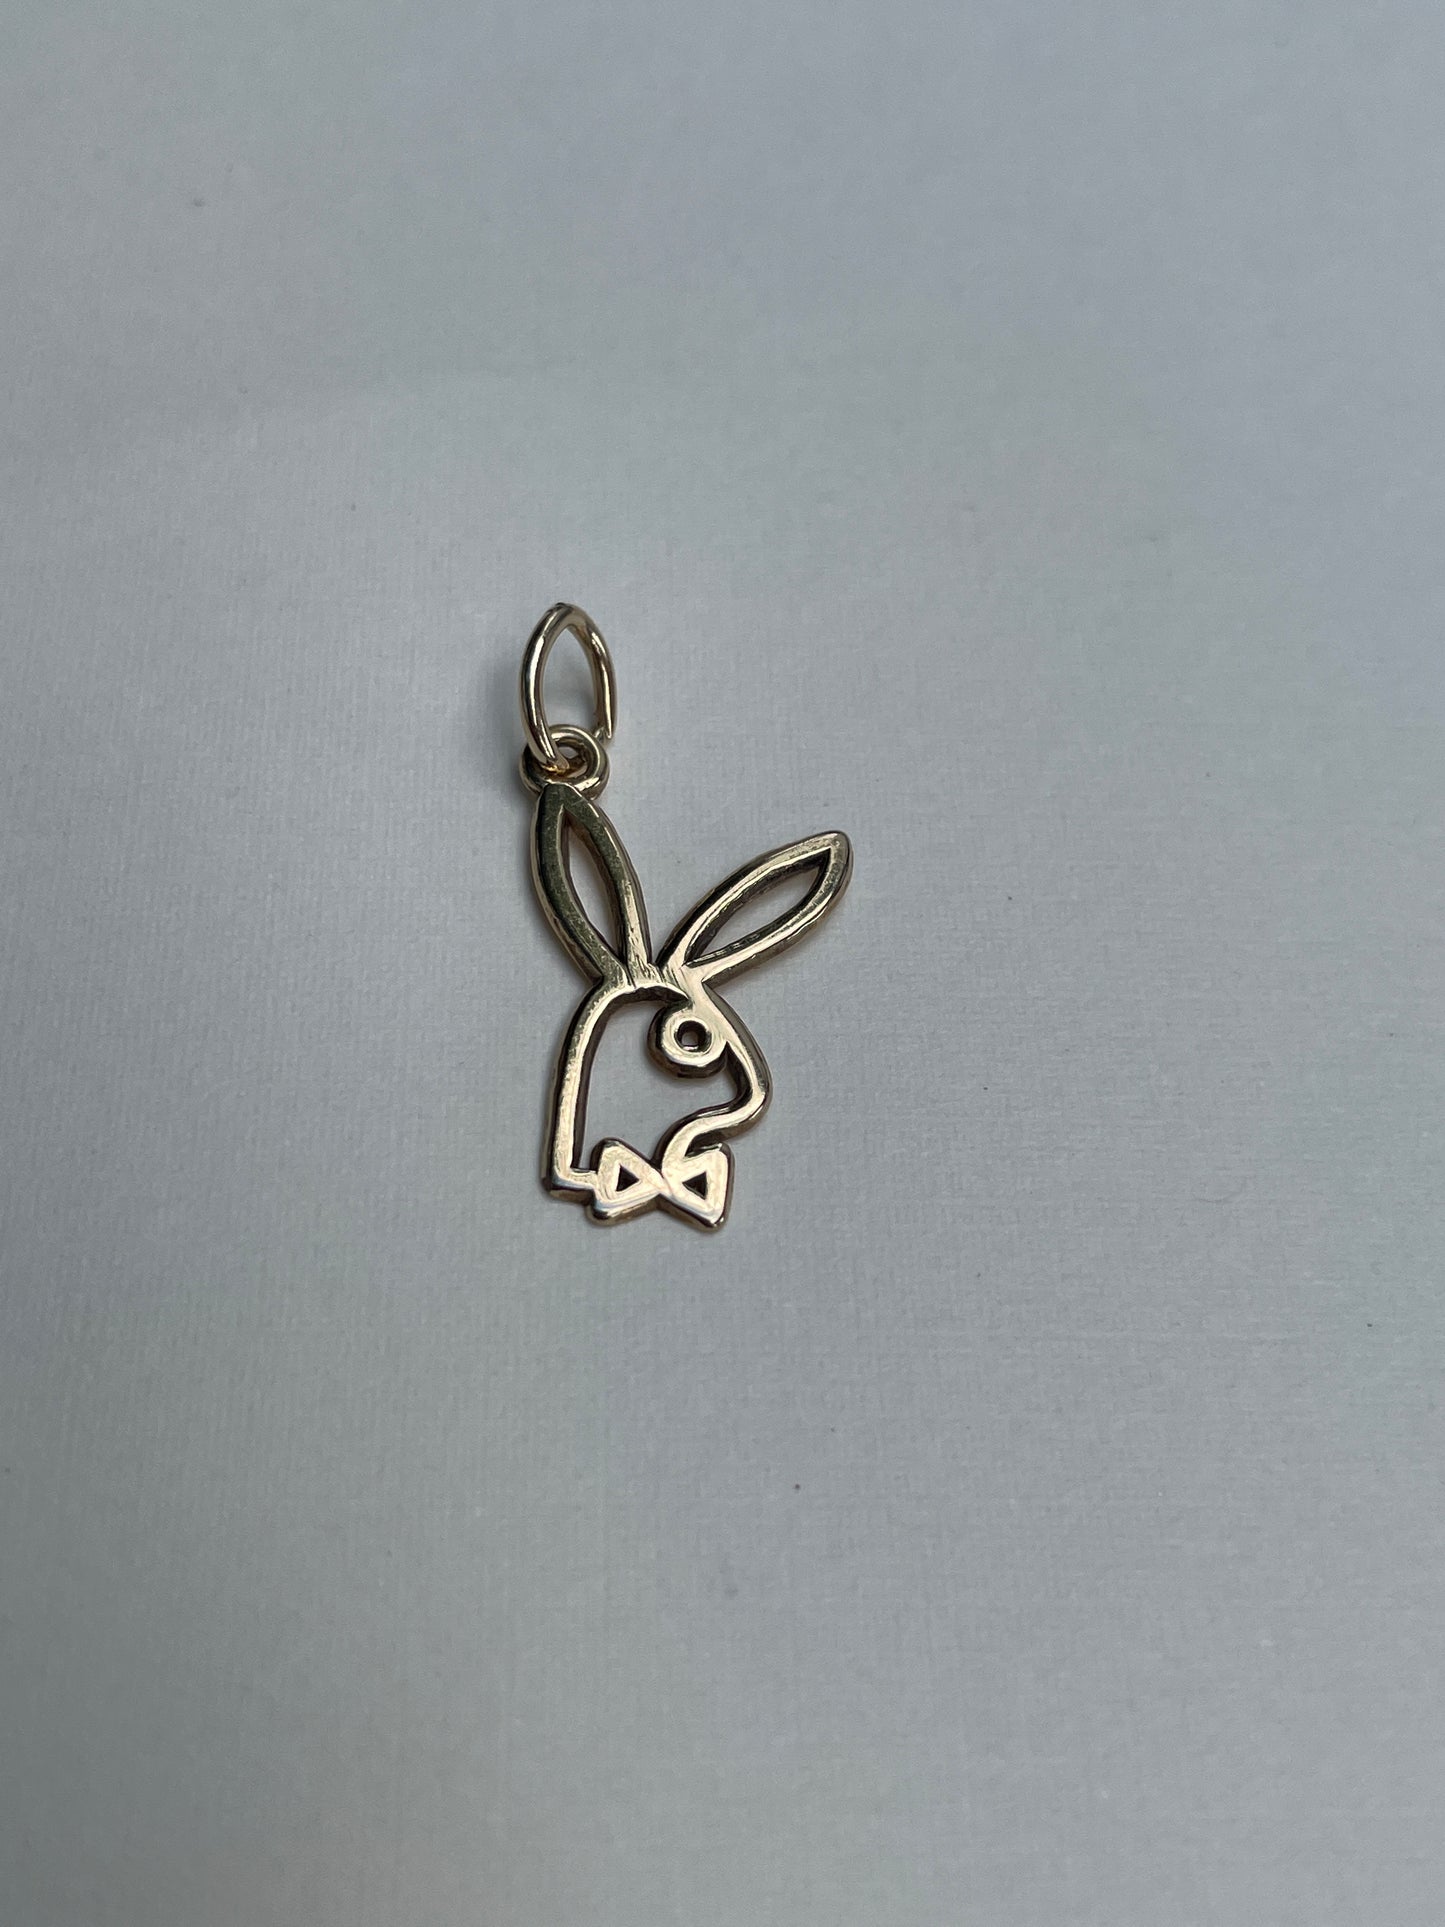 Vintage 10K Collectable Playboy Charm